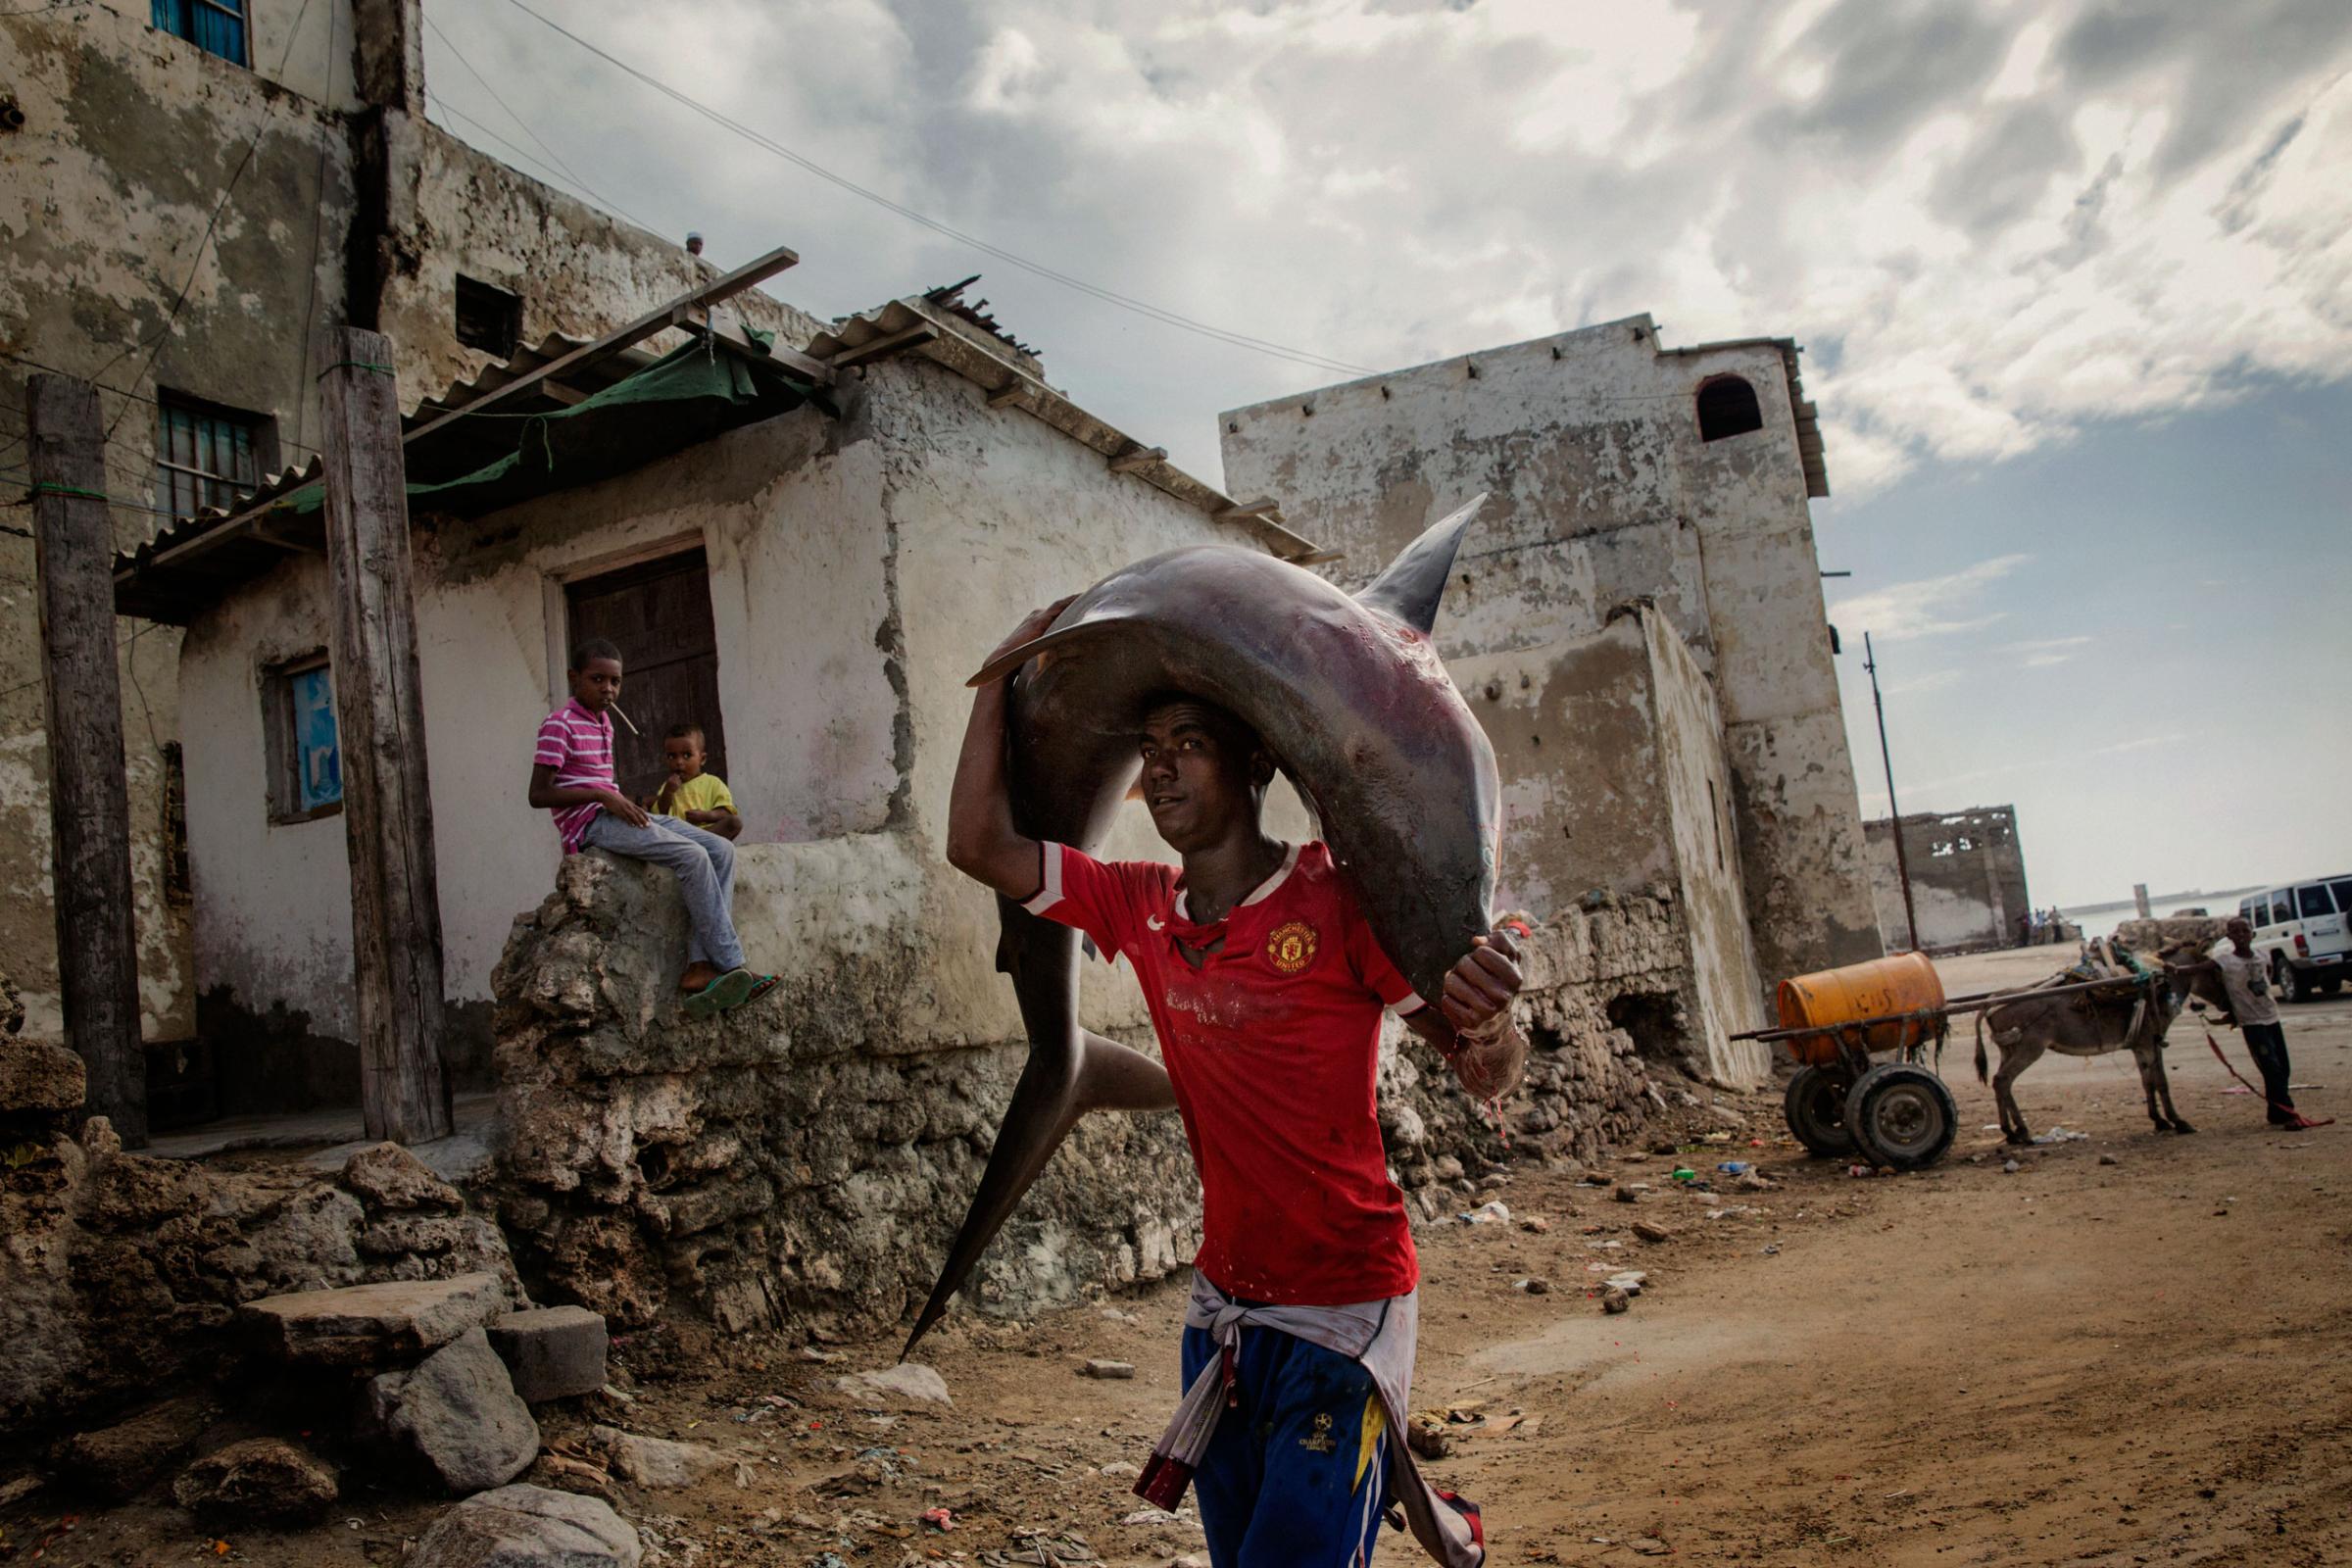 A man carries a shark on the streets of Mogadishu, Somalia. A recent escalation of plunders in Somali waters by foreign fishing vessels could mean the return of hijackings, locals fear. The country's waters have been exploited by illegal fisheries and the economic infrastructure that once provided jobs has been ravaged.